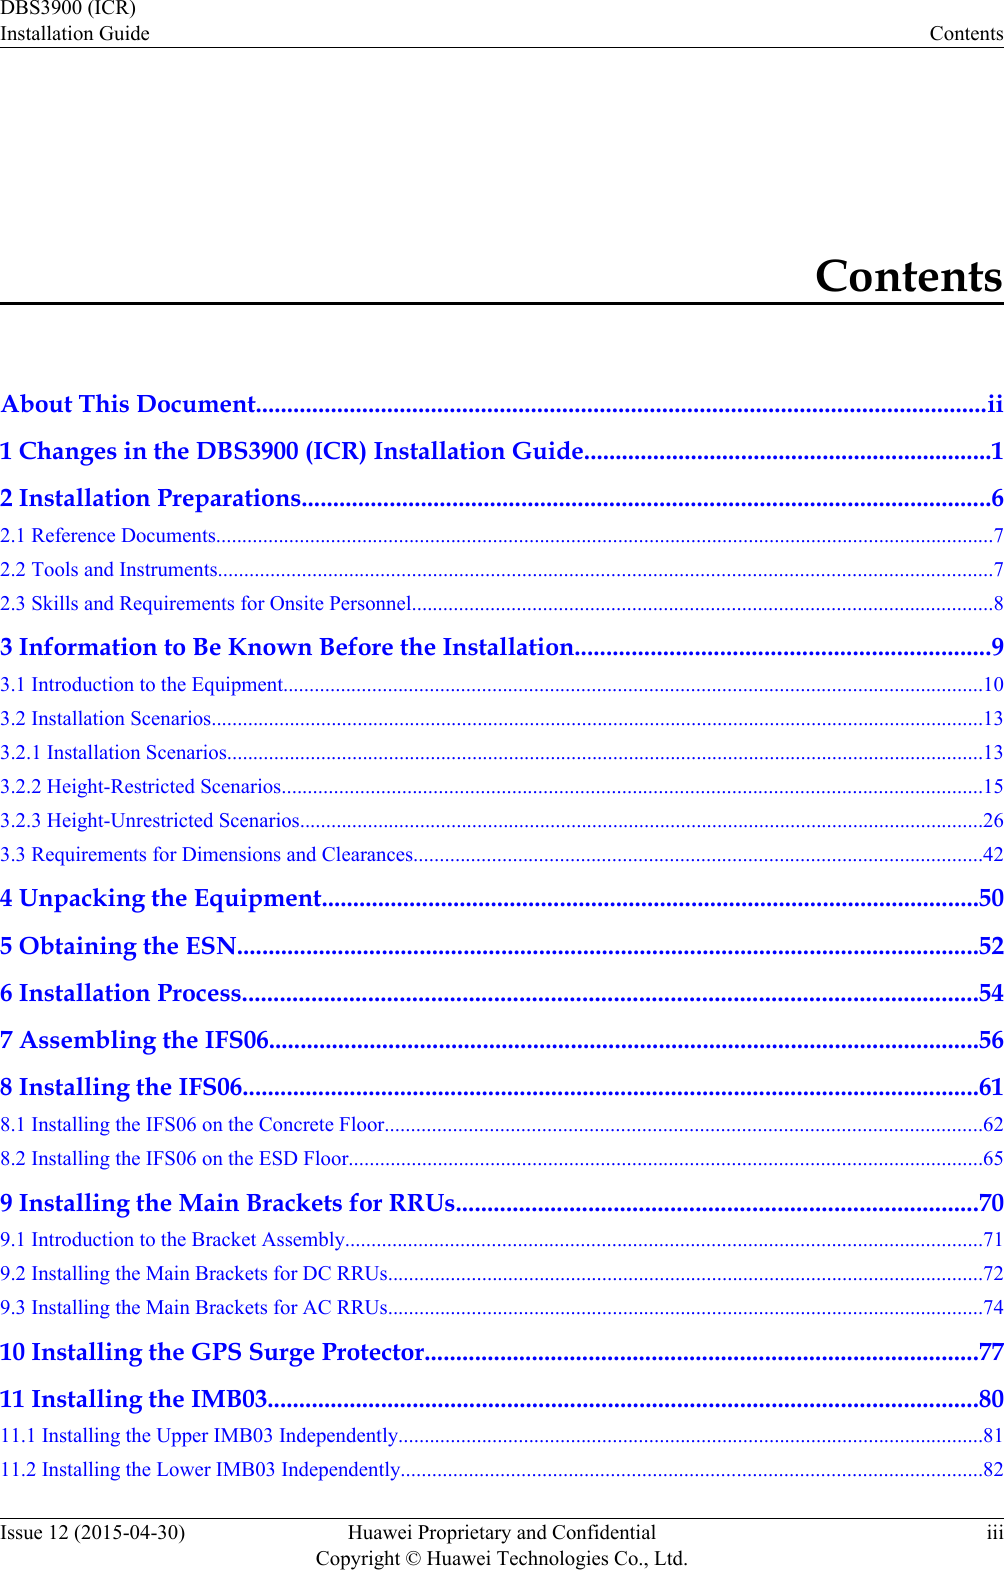 ContentsAbout This Document.....................................................................................................................ii1 Changes in the DBS3900 (ICR) Installation Guide.................................................................12 Installation Preparations..............................................................................................................62.1 Reference Documents.....................................................................................................................................................72.2 Tools and Instruments....................................................................................................................................................72.3 Skills and Requirements for Onsite Personnel...............................................................................................................83 Information to Be Known Before the Installation..................................................................93.1 Introduction to the Equipment......................................................................................................................................103.2 Installation Scenarios....................................................................................................................................................133.2.1 Installation Scenarios.................................................................................................................................................133.2.2 Height-Restricted Scenarios......................................................................................................................................153.2.3 Height-Unrestricted Scenarios...................................................................................................................................263.3 Requirements for Dimensions and Clearances.............................................................................................................424 Unpacking the Equipment.........................................................................................................505 Obtaining the ESN......................................................................................................................526 Installation Process.....................................................................................................................547 Assembling the IFS06.................................................................................................................568 Installing the IFS06.....................................................................................................................618.1 Installing the IFS06 on the Concrete Floor..................................................................................................................628.2 Installing the IFS06 on the ESD Floor.........................................................................................................................659 Installing the Main Brackets for RRUs...................................................................................709.1 Introduction to the Bracket Assembly..........................................................................................................................719.2 Installing the Main Brackets for DC RRUs..................................................................................................................729.3 Installing the Main Brackets for AC RRUs..................................................................................................................7410 Installing the GPS Surge Protector........................................................................................7711 Installing the IMB03.................................................................................................................8011.1 Installing the Upper IMB03 Independently................................................................................................................8111.2 Installing the Lower IMB03 Independently...............................................................................................................82DBS3900 (ICR)Installation Guide ContentsIssue 12 (2015-04-30) Huawei Proprietary and ConfidentialCopyright © Huawei Technologies Co., Ltd.iii